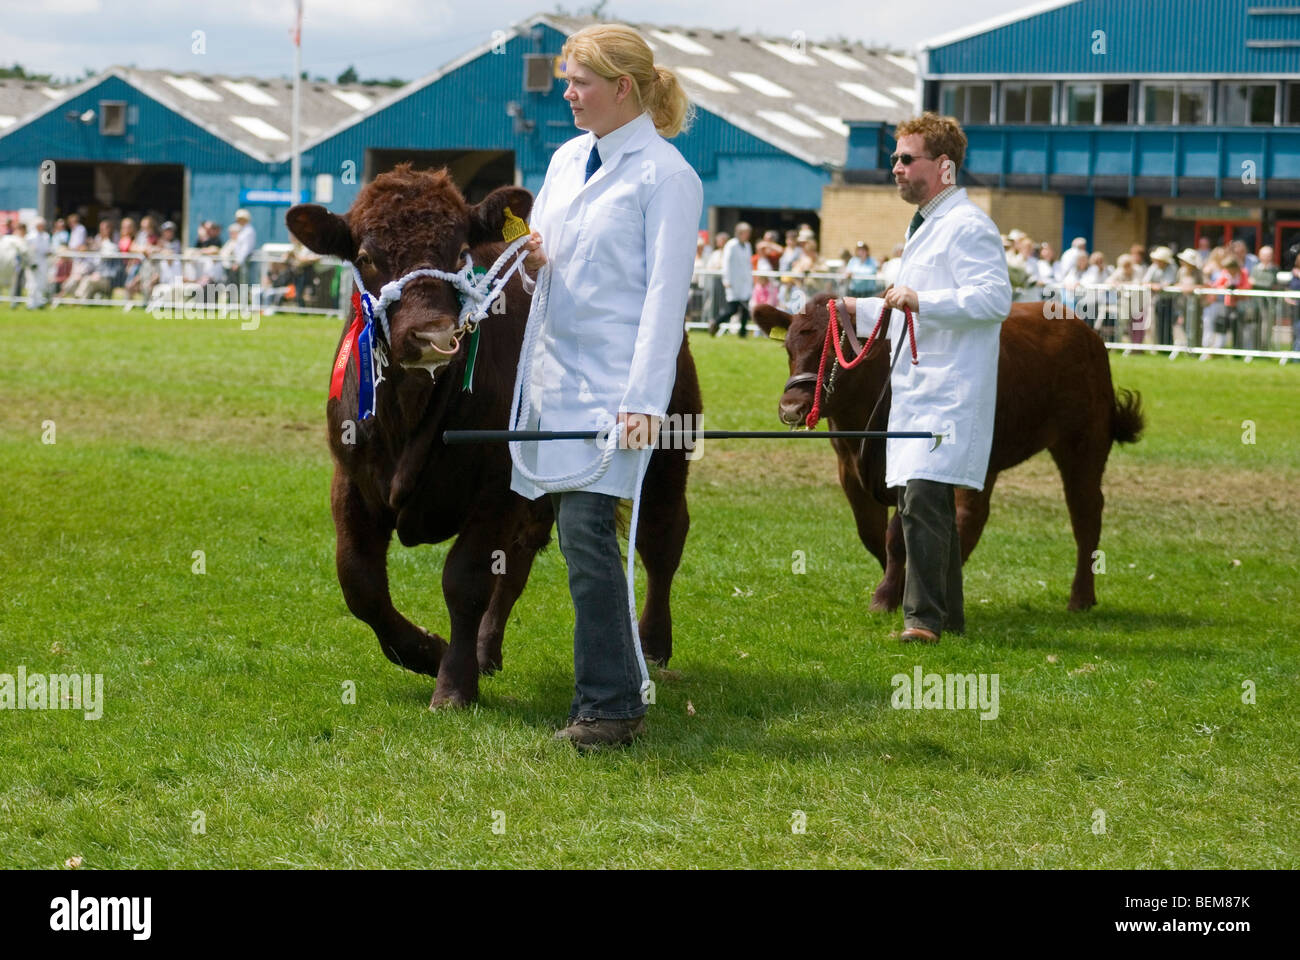 Small Dexter Cattle with handlers man and woman wearing white coats in Show Ring Stock Photo